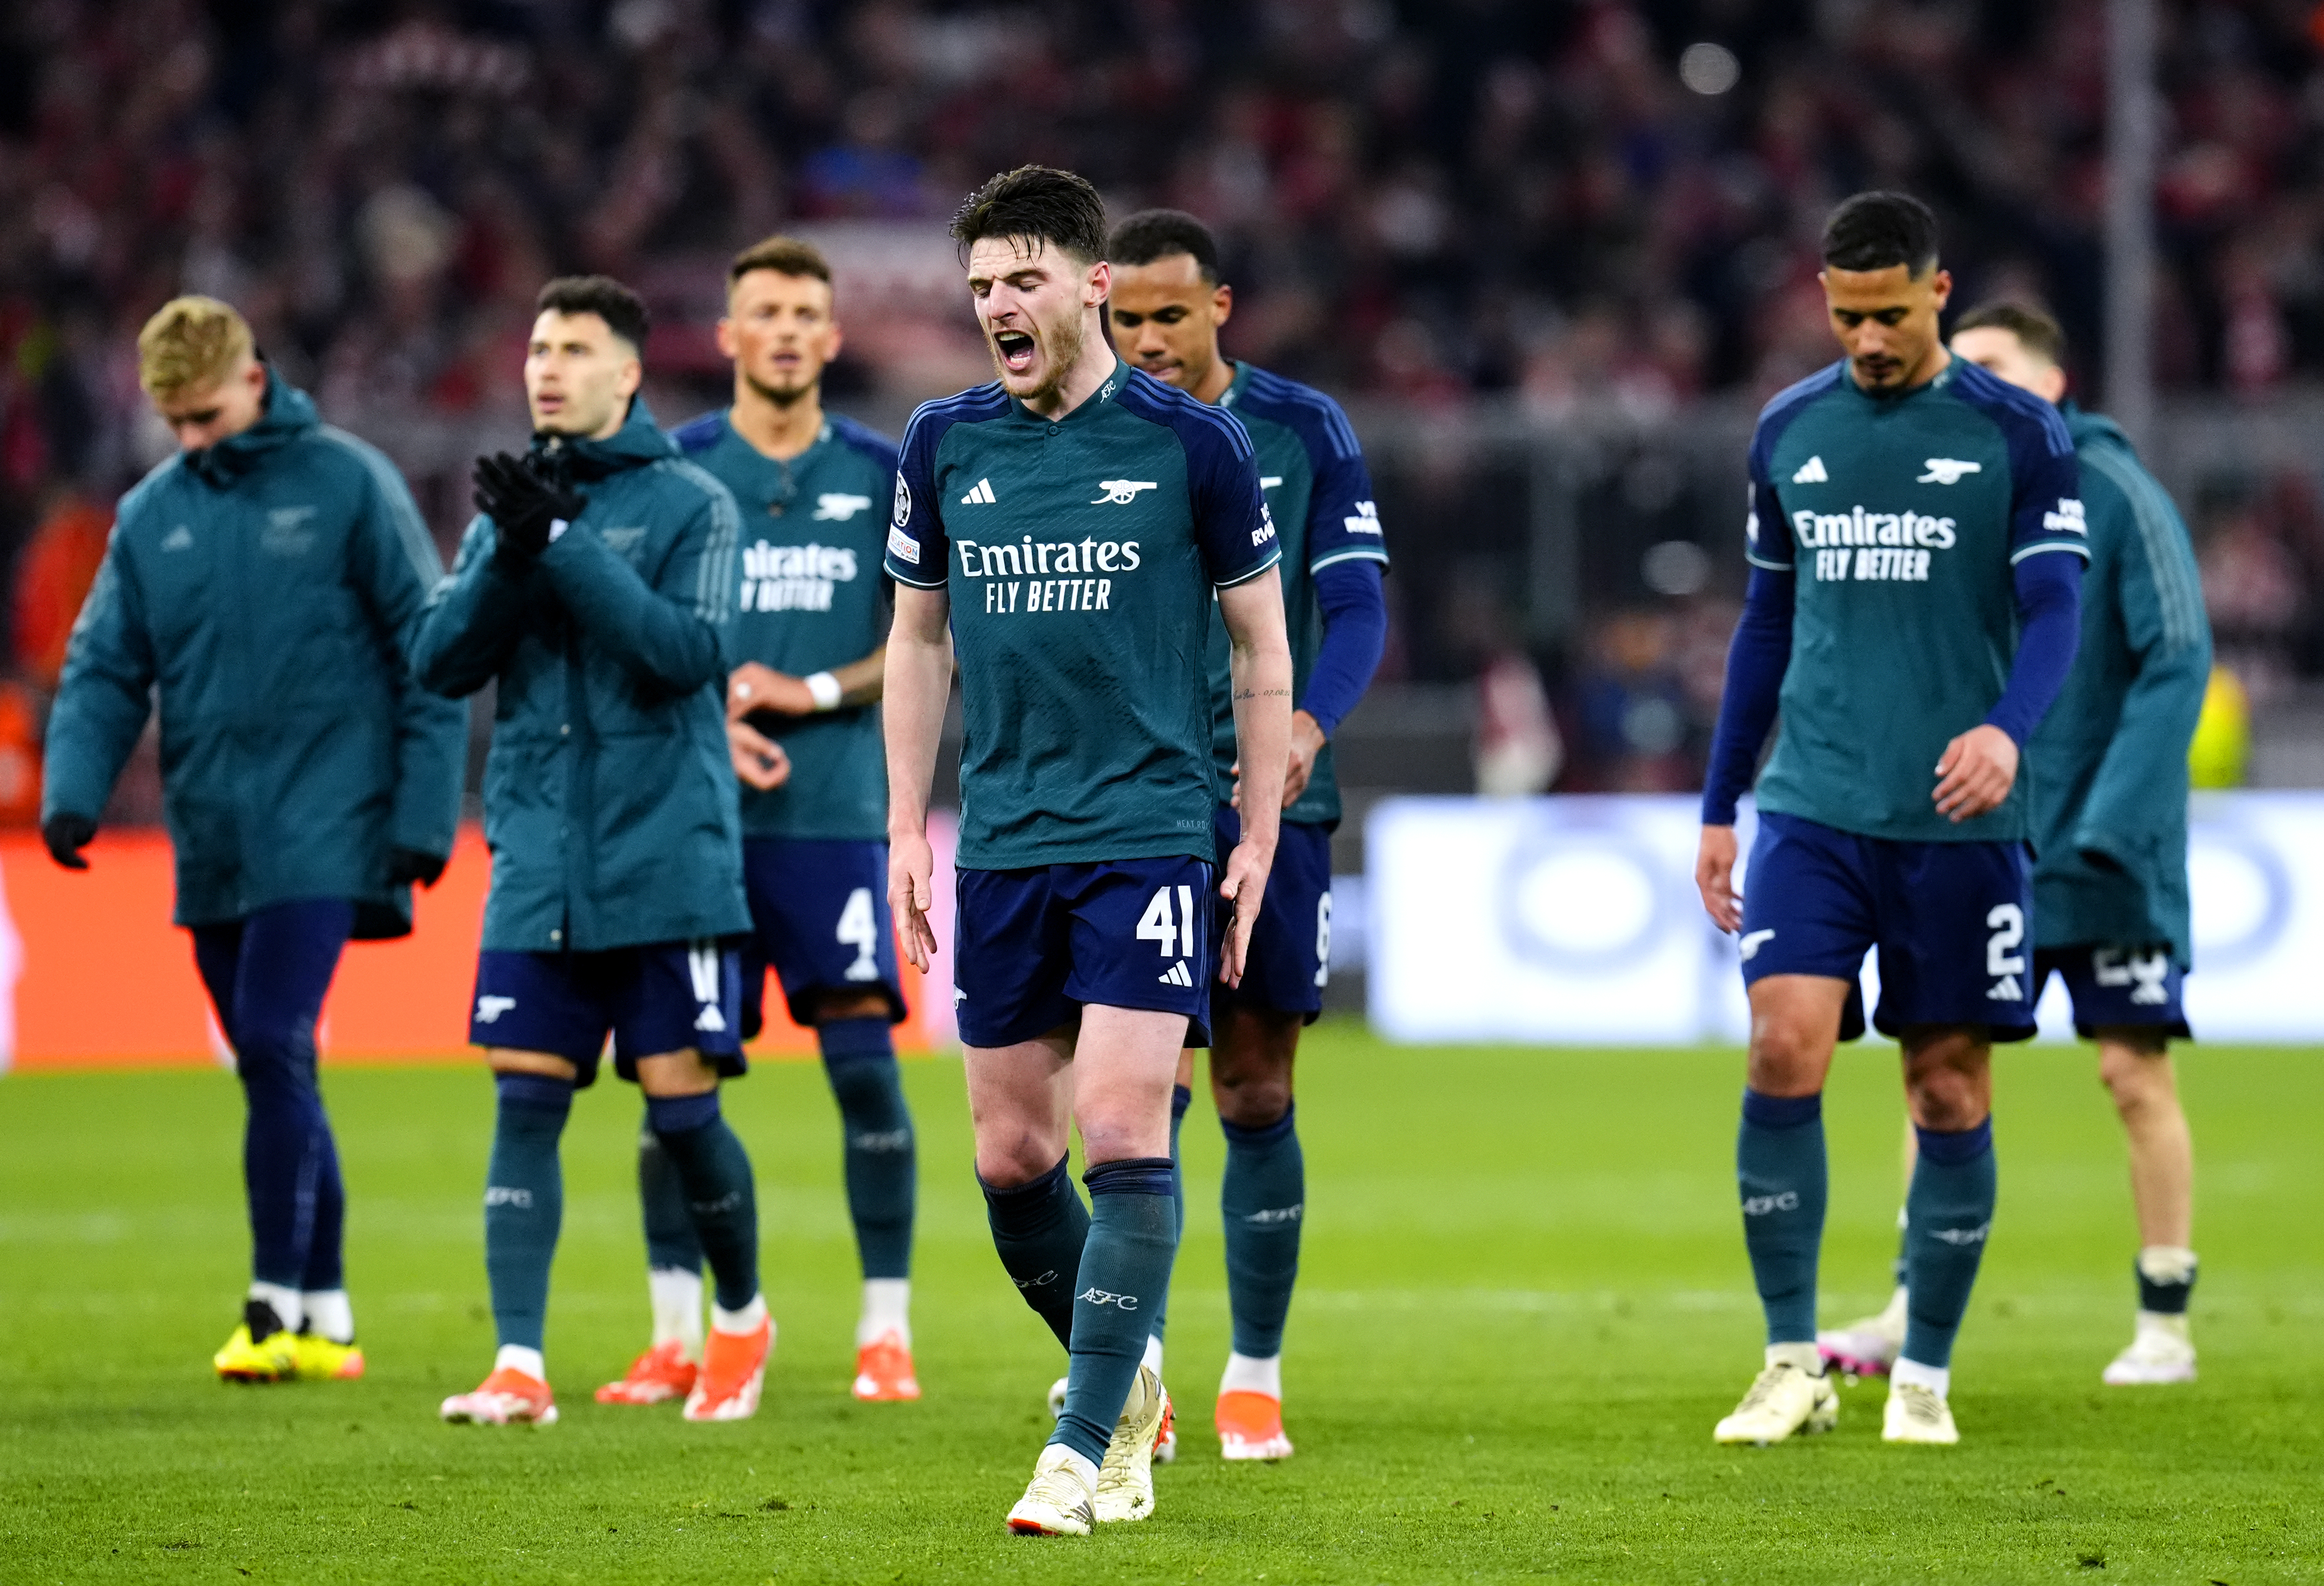 Arsenal were knocked out of the Champions League by Bayern Munich